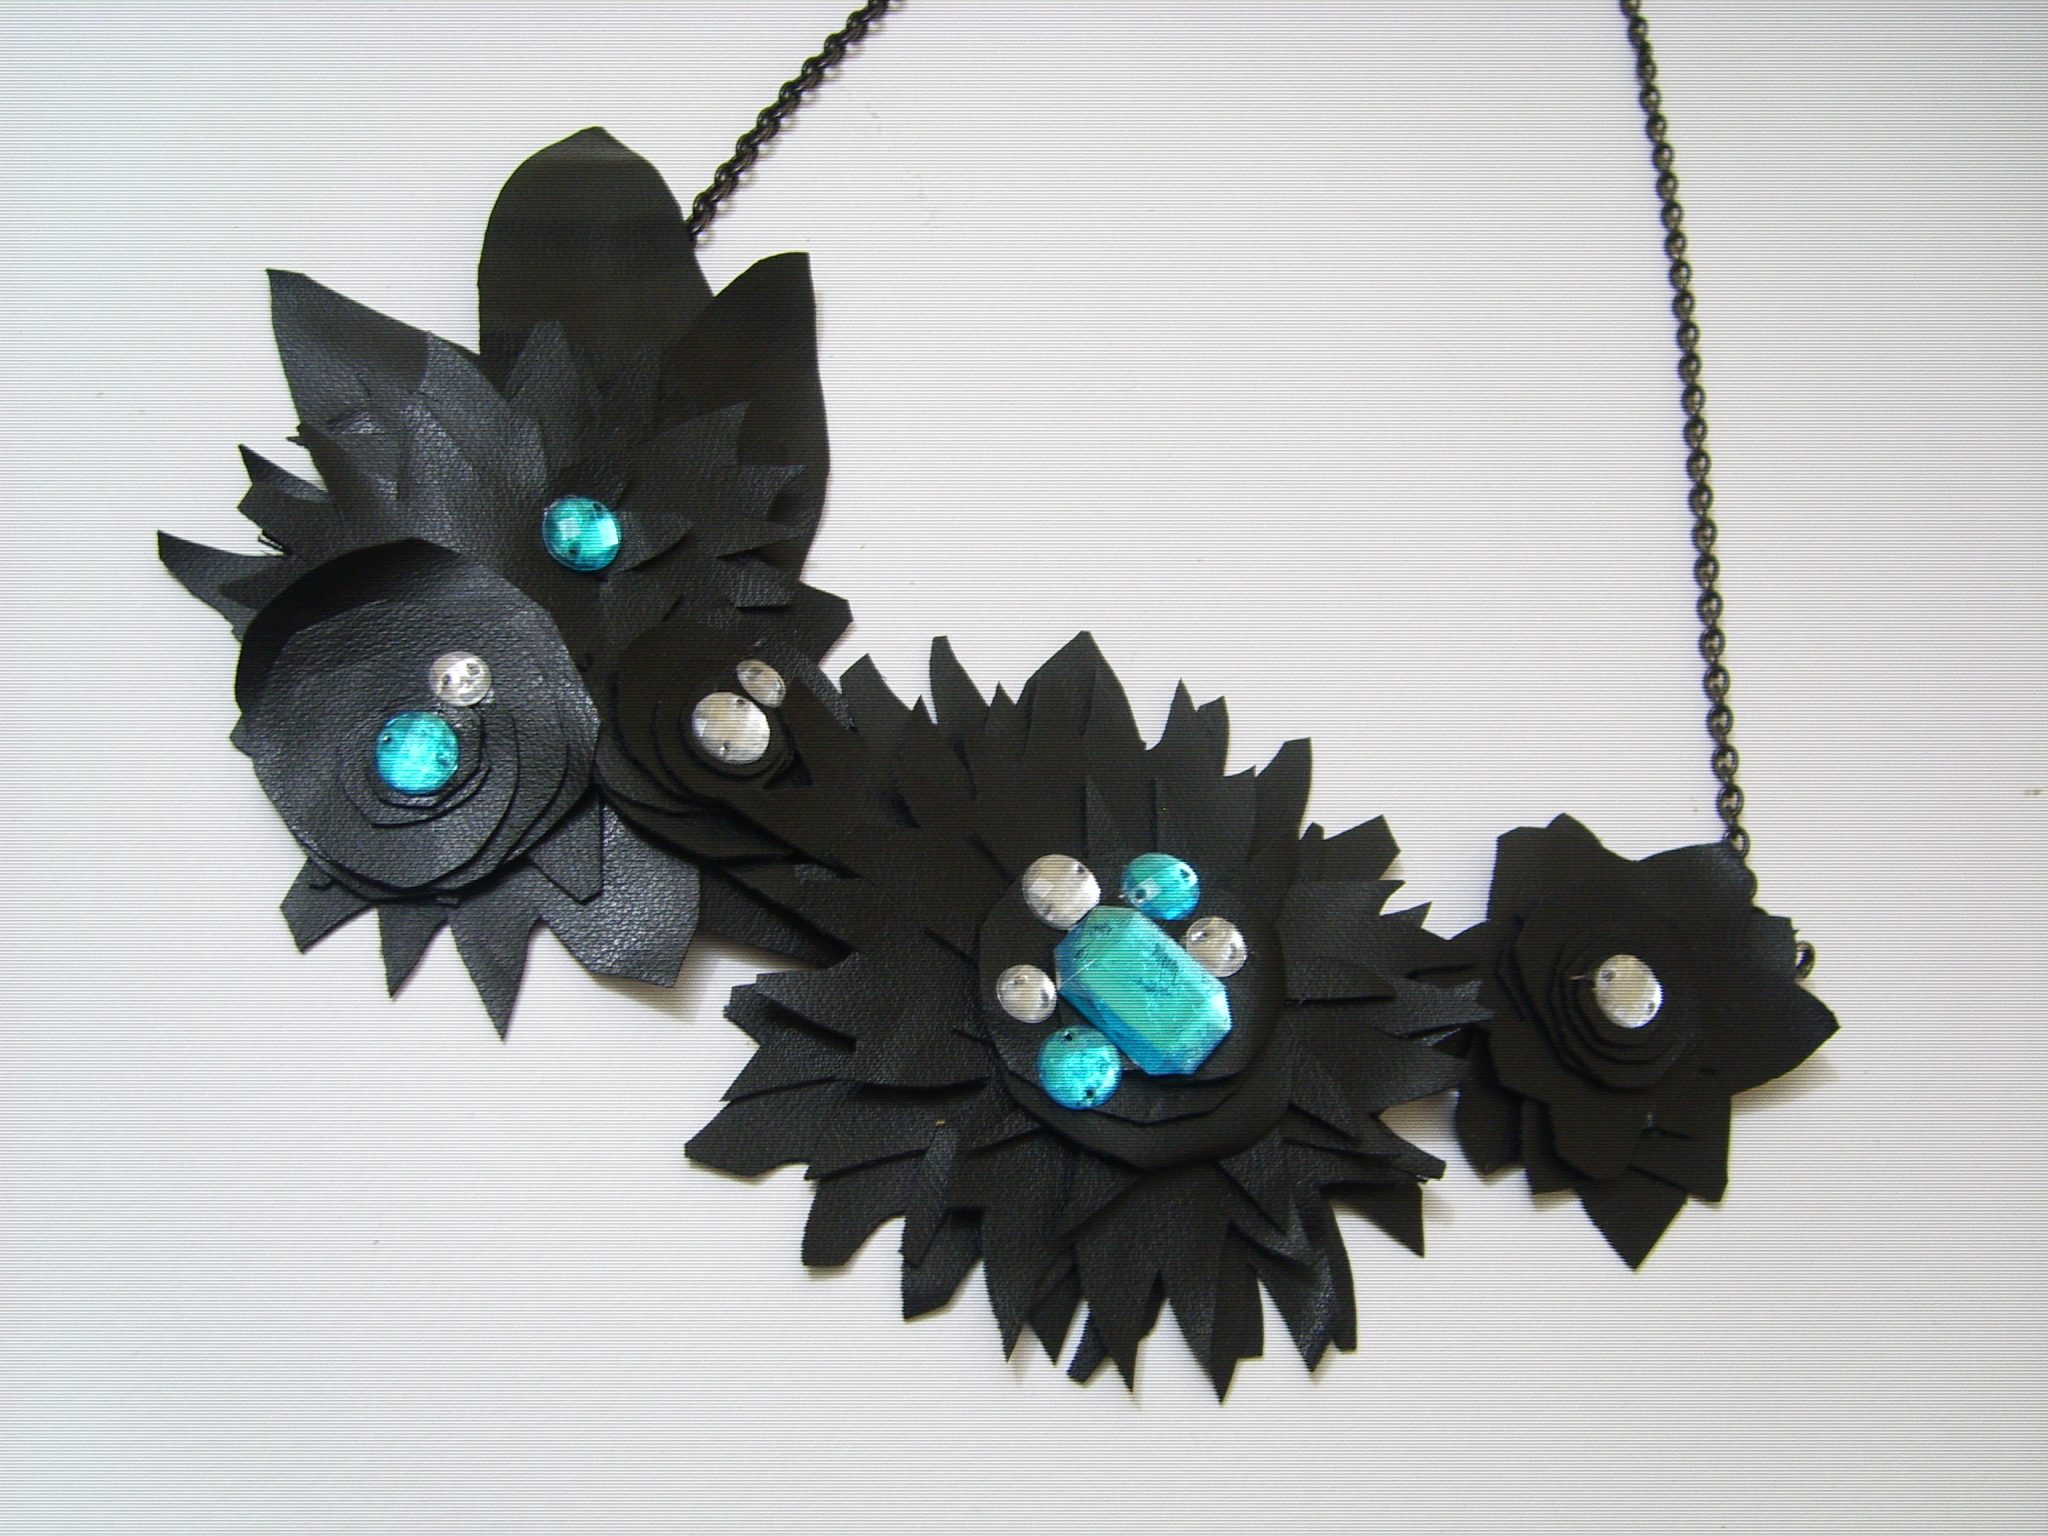 anthro inspired necklace making